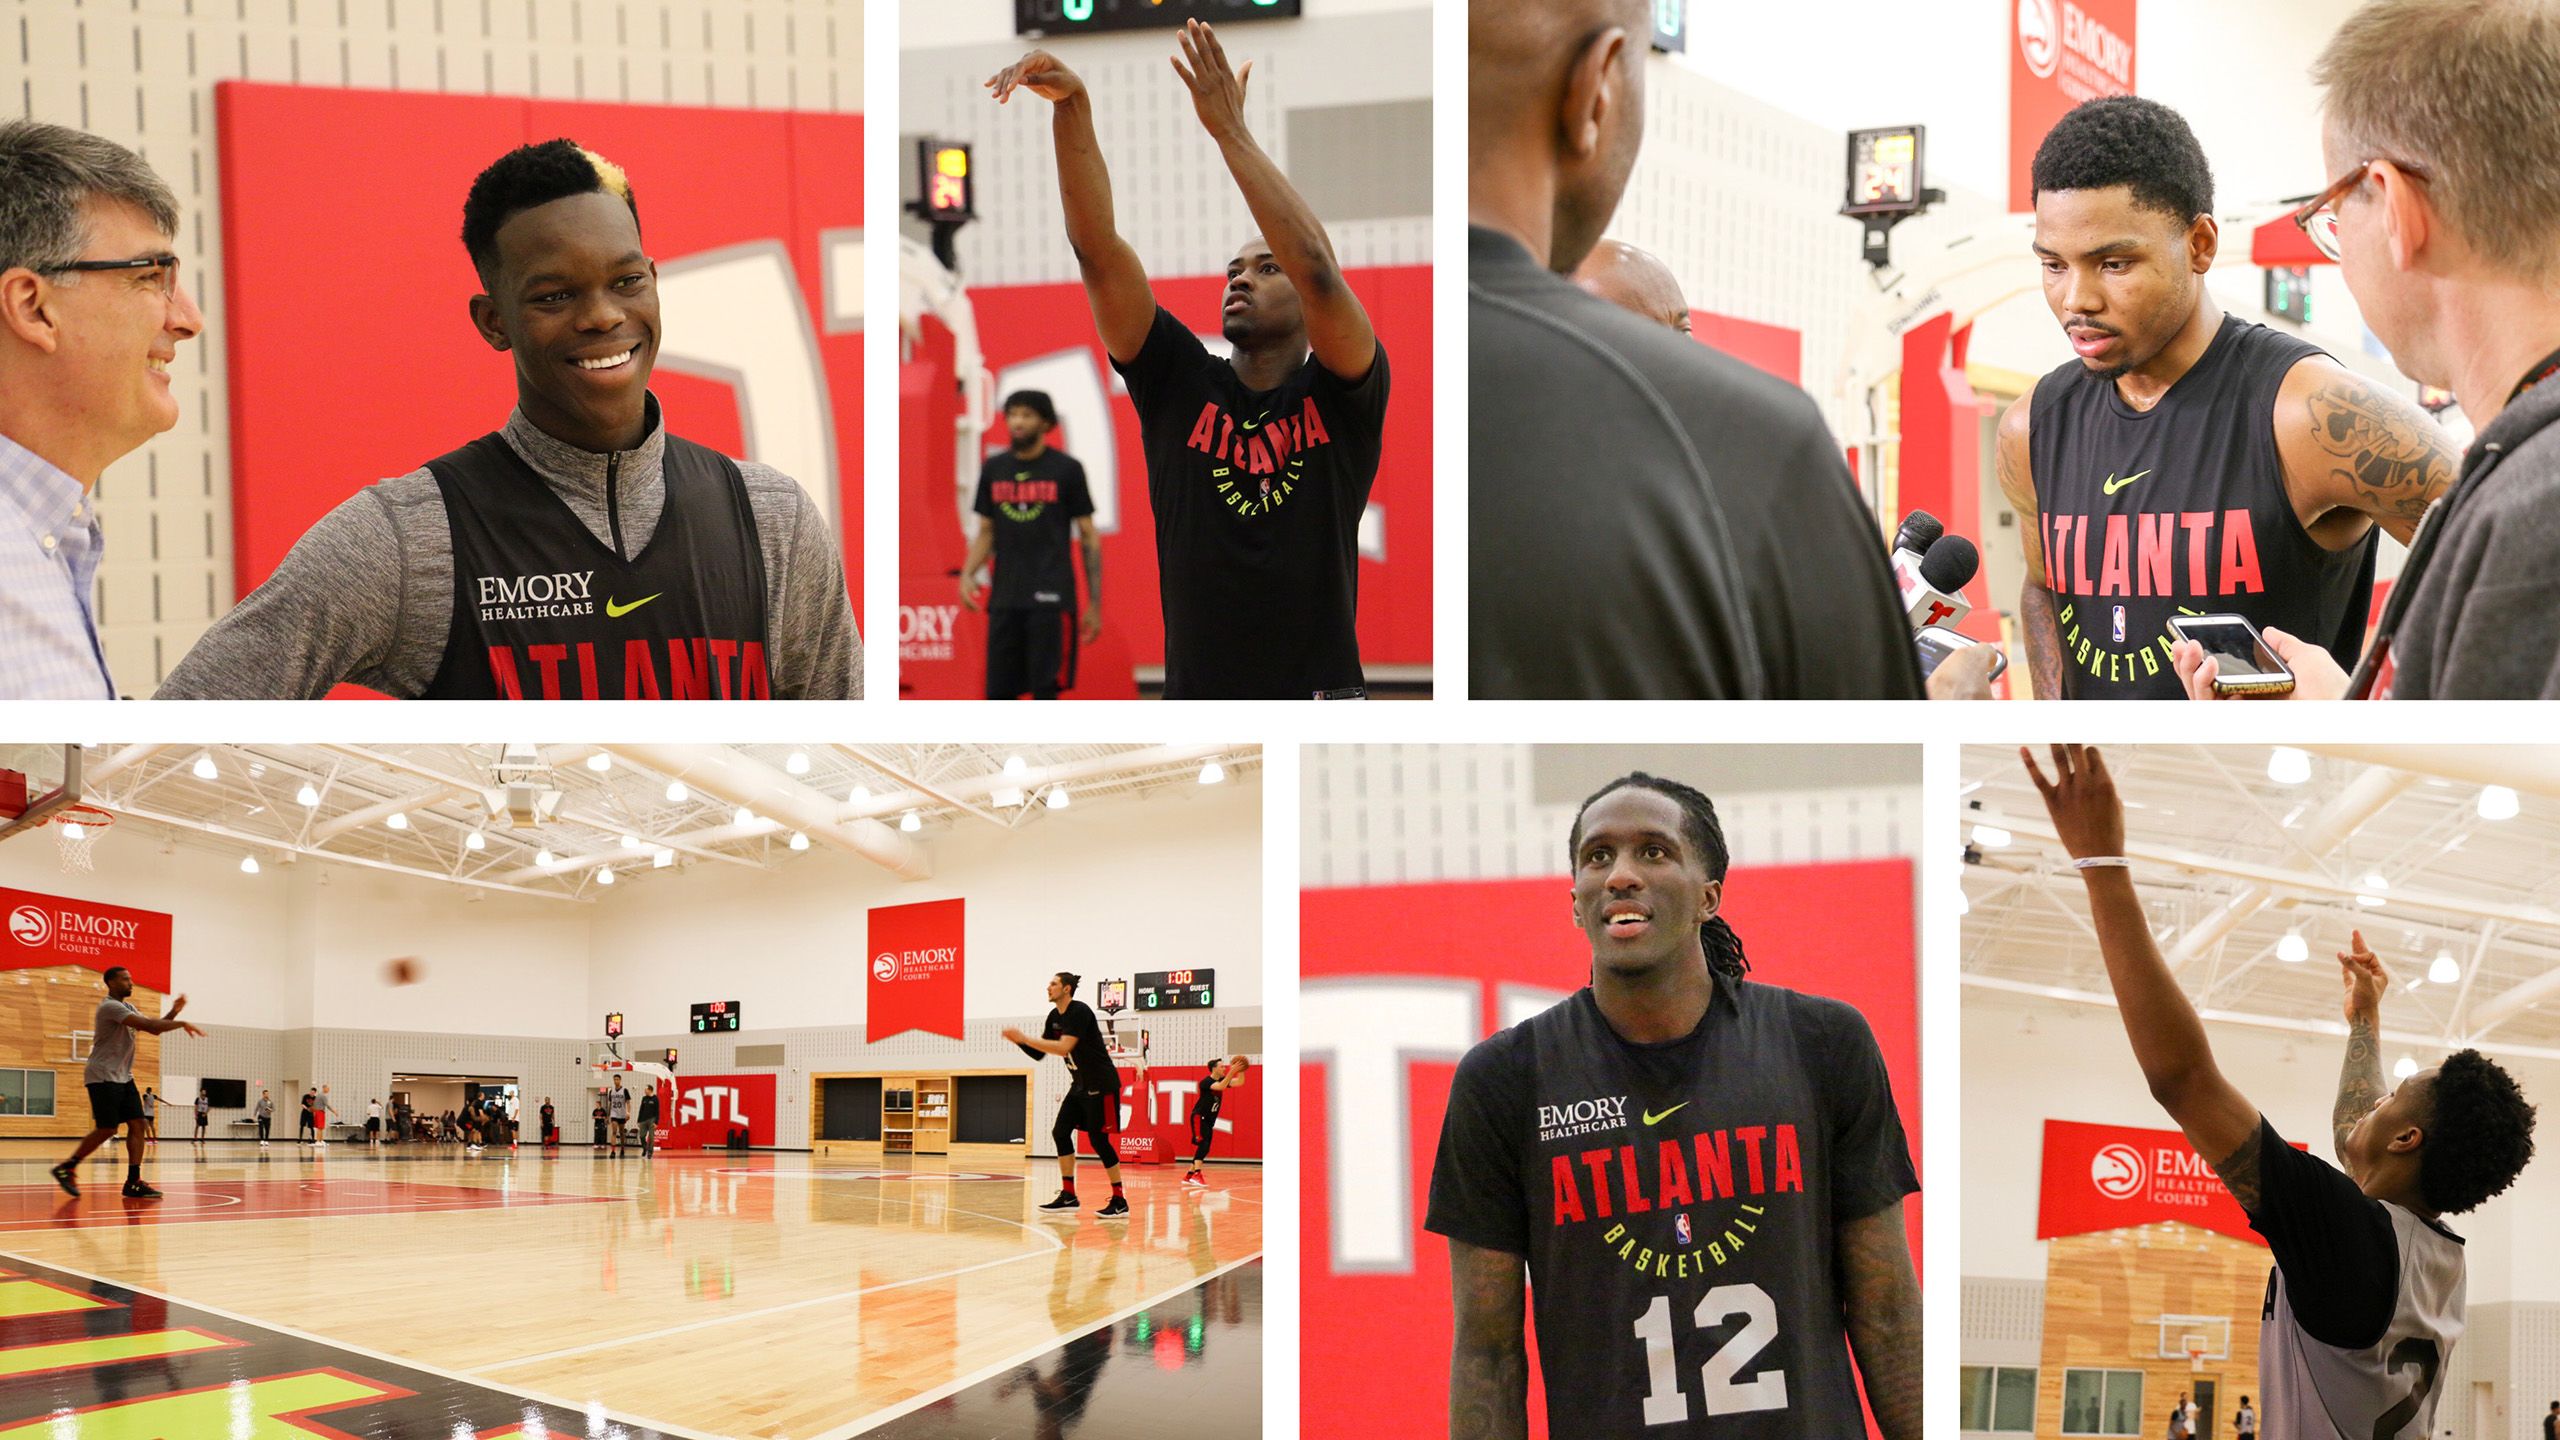 Atlanta Hawks players shoot baskets and scrimmage on the full-sized practice courts.